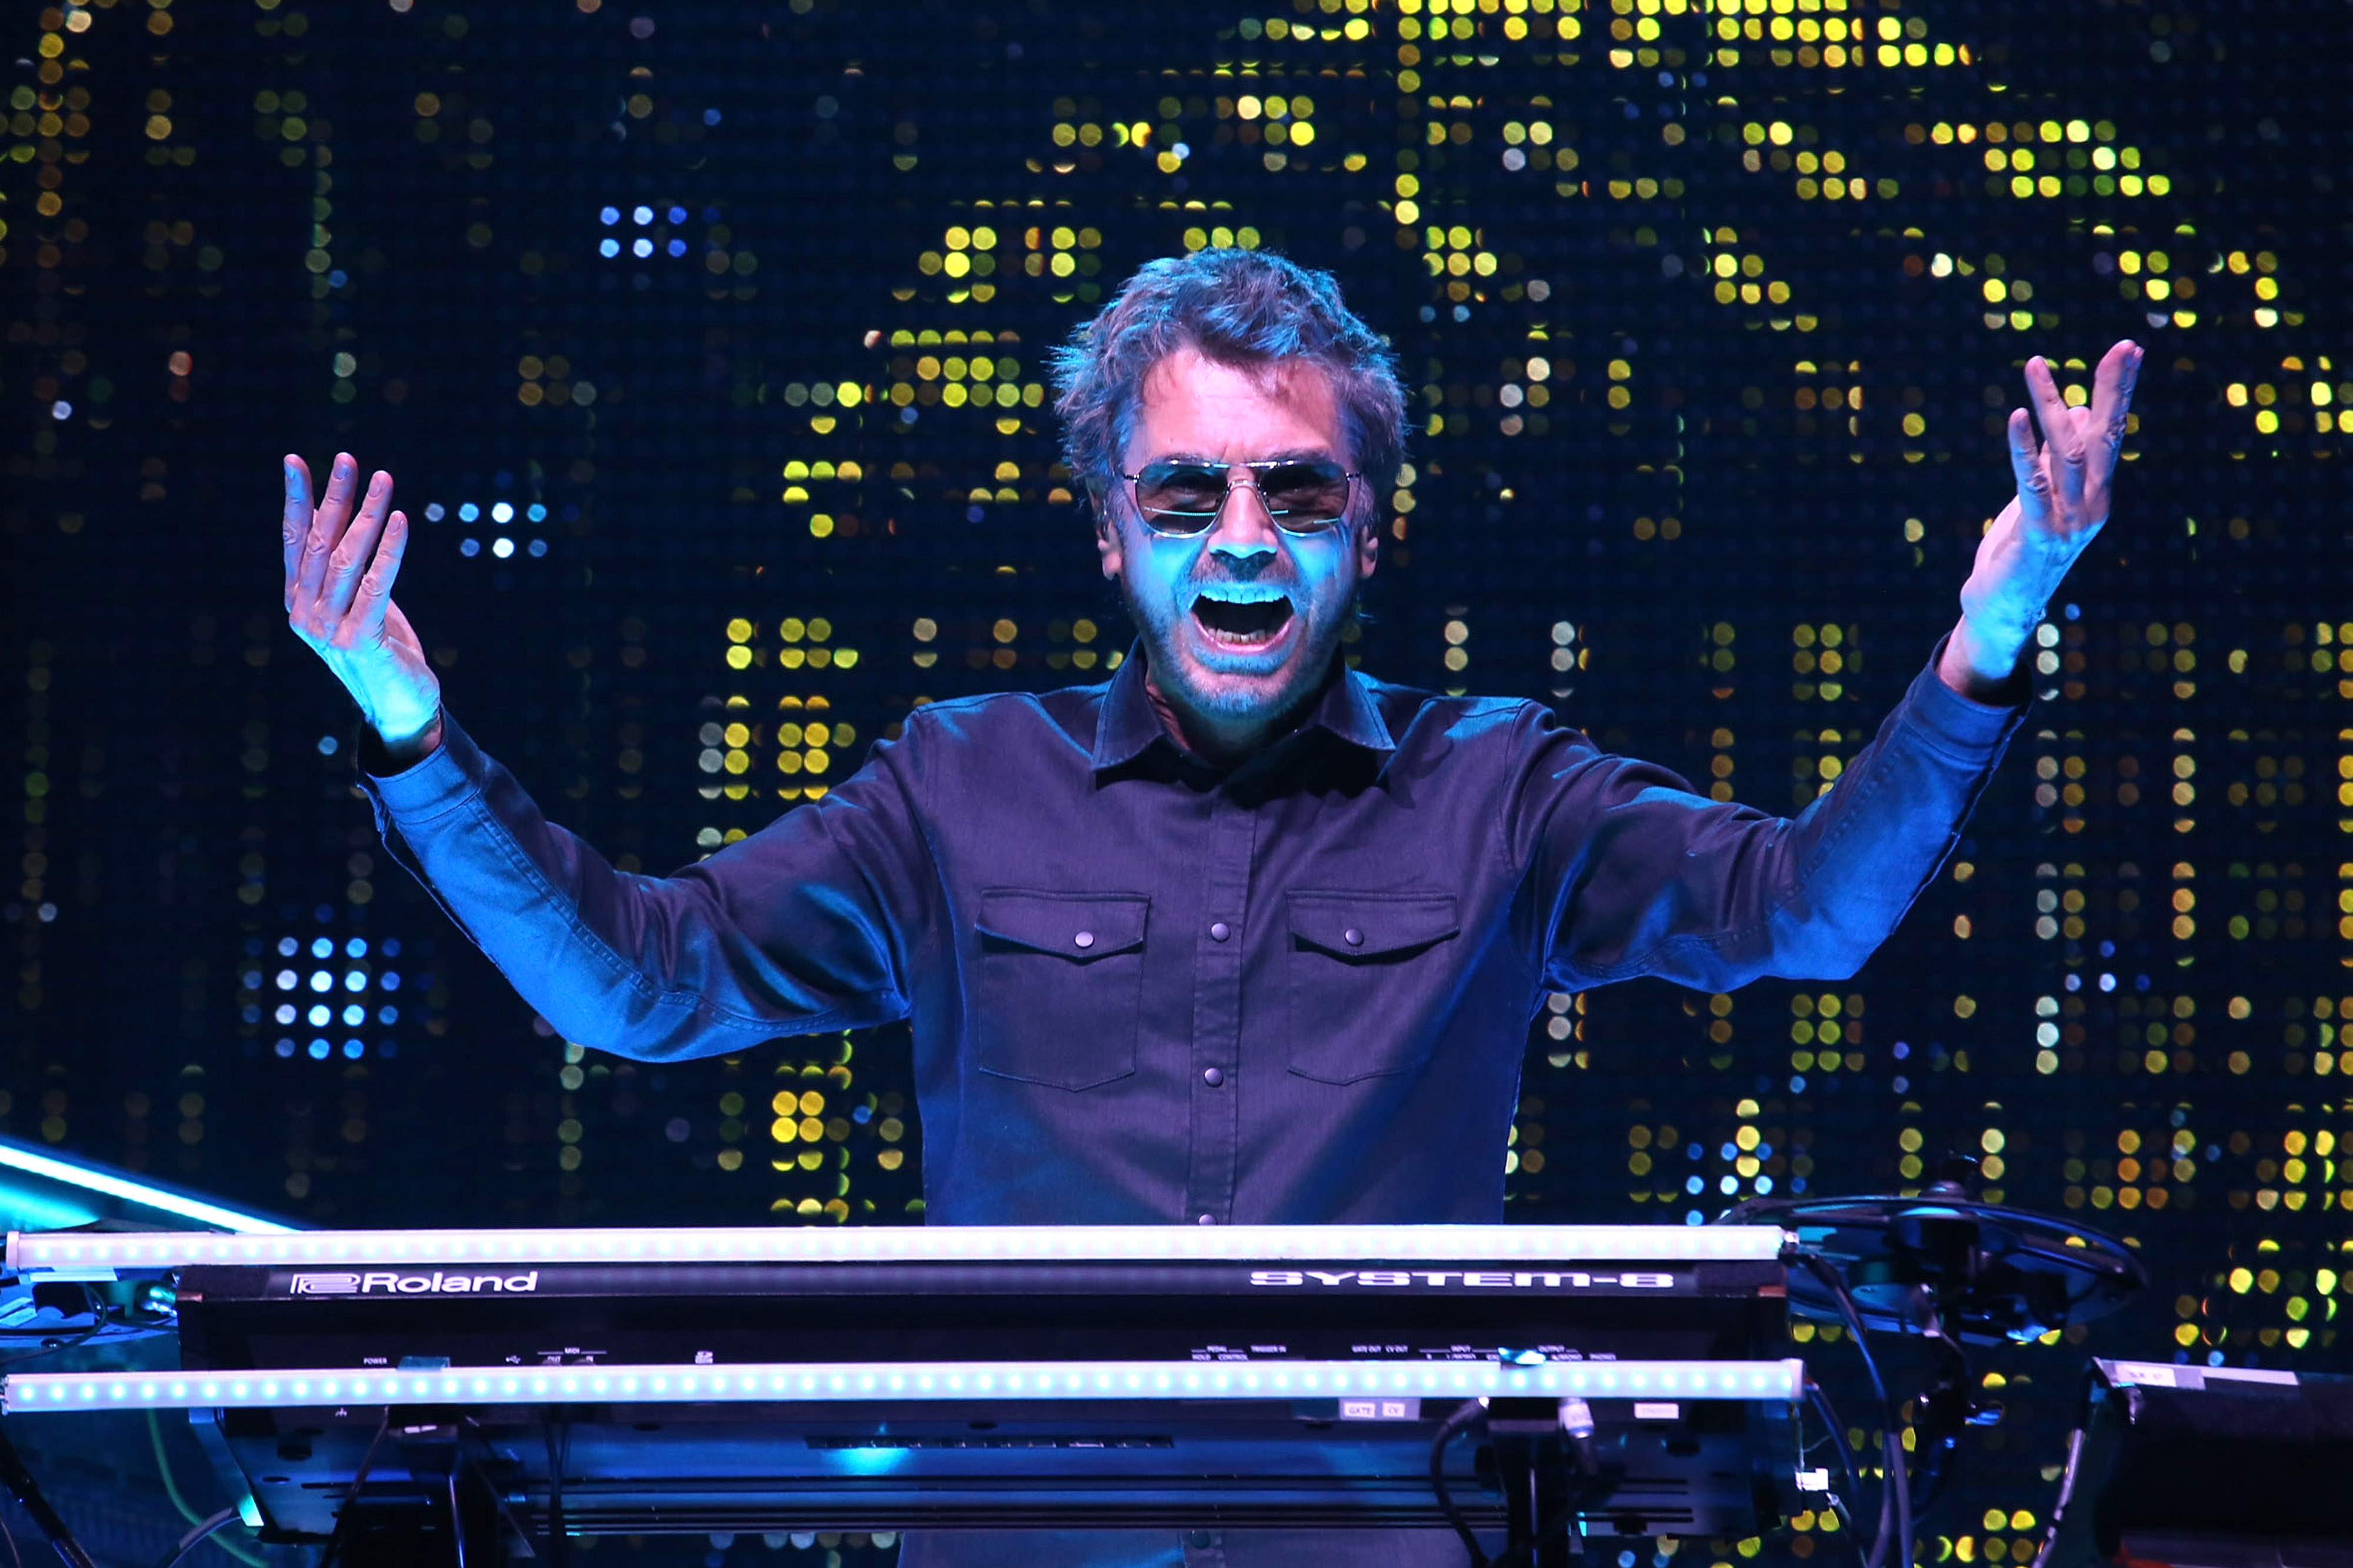 Jean-Michel Jarre is famous for the visual displays at his live concerts